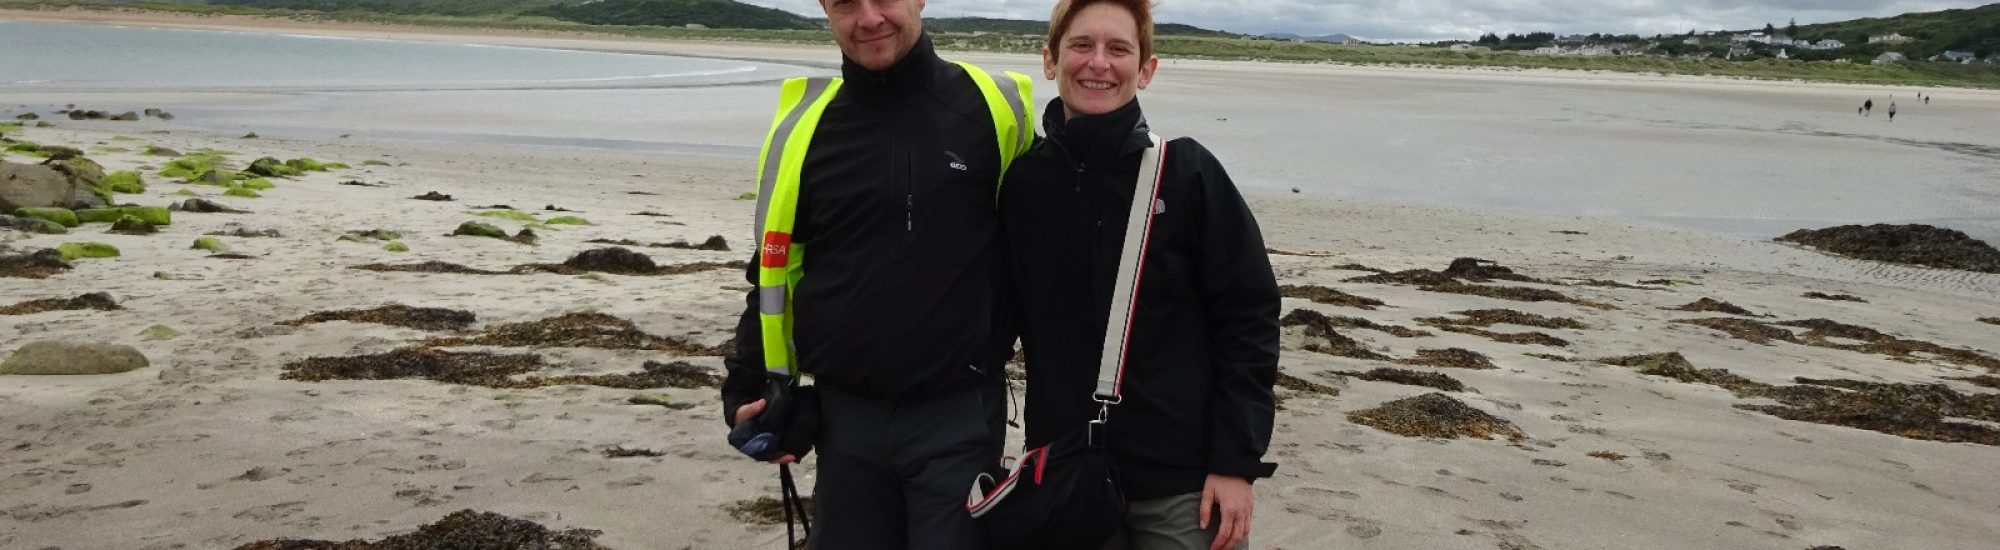 Cycling Holiday in Ireland, Simona and Marco